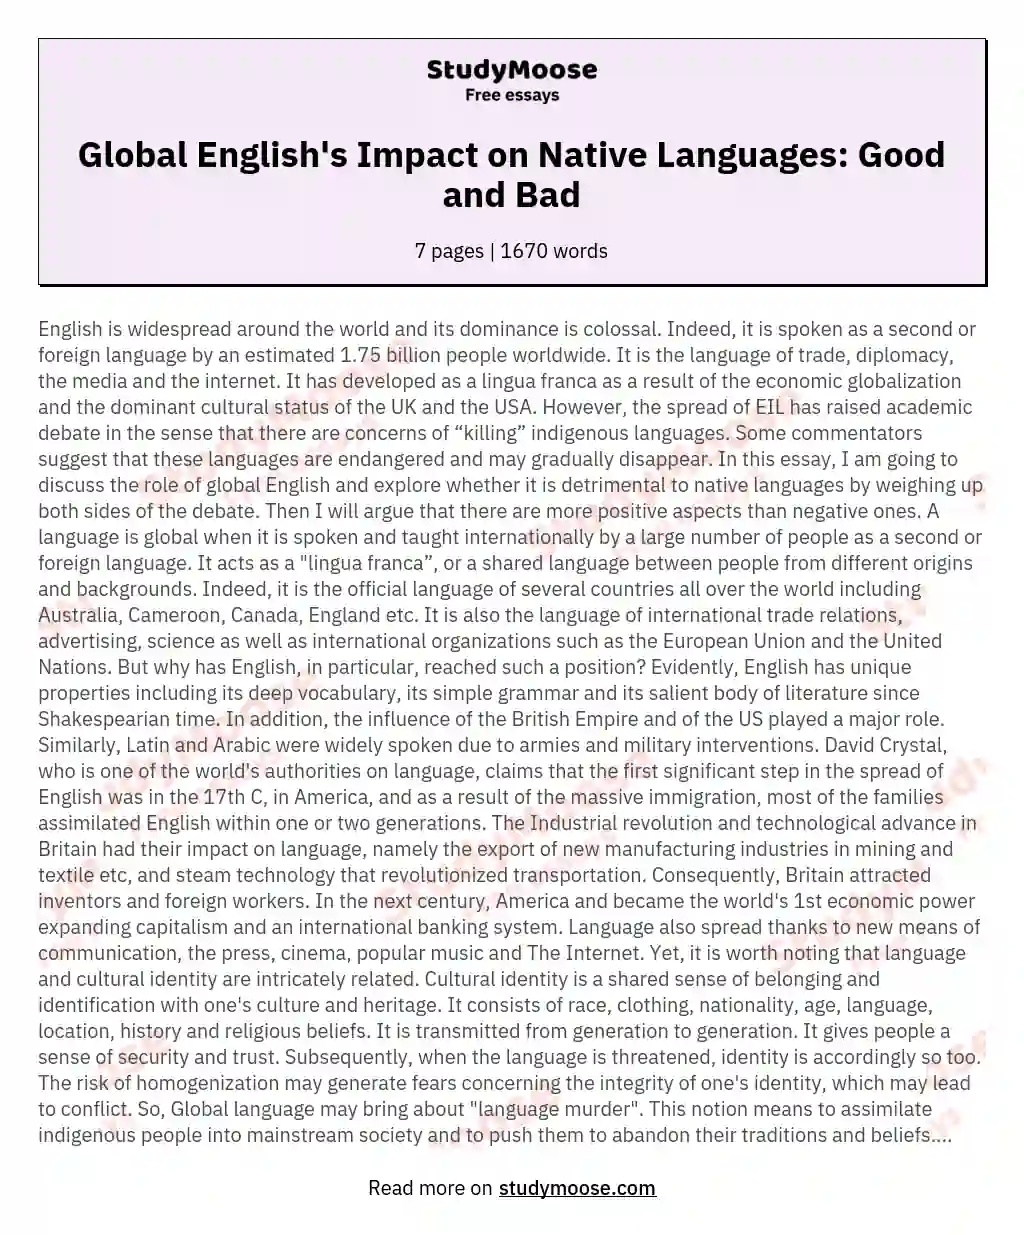 Global English's Impact on Native Languages: Good and Bad essay